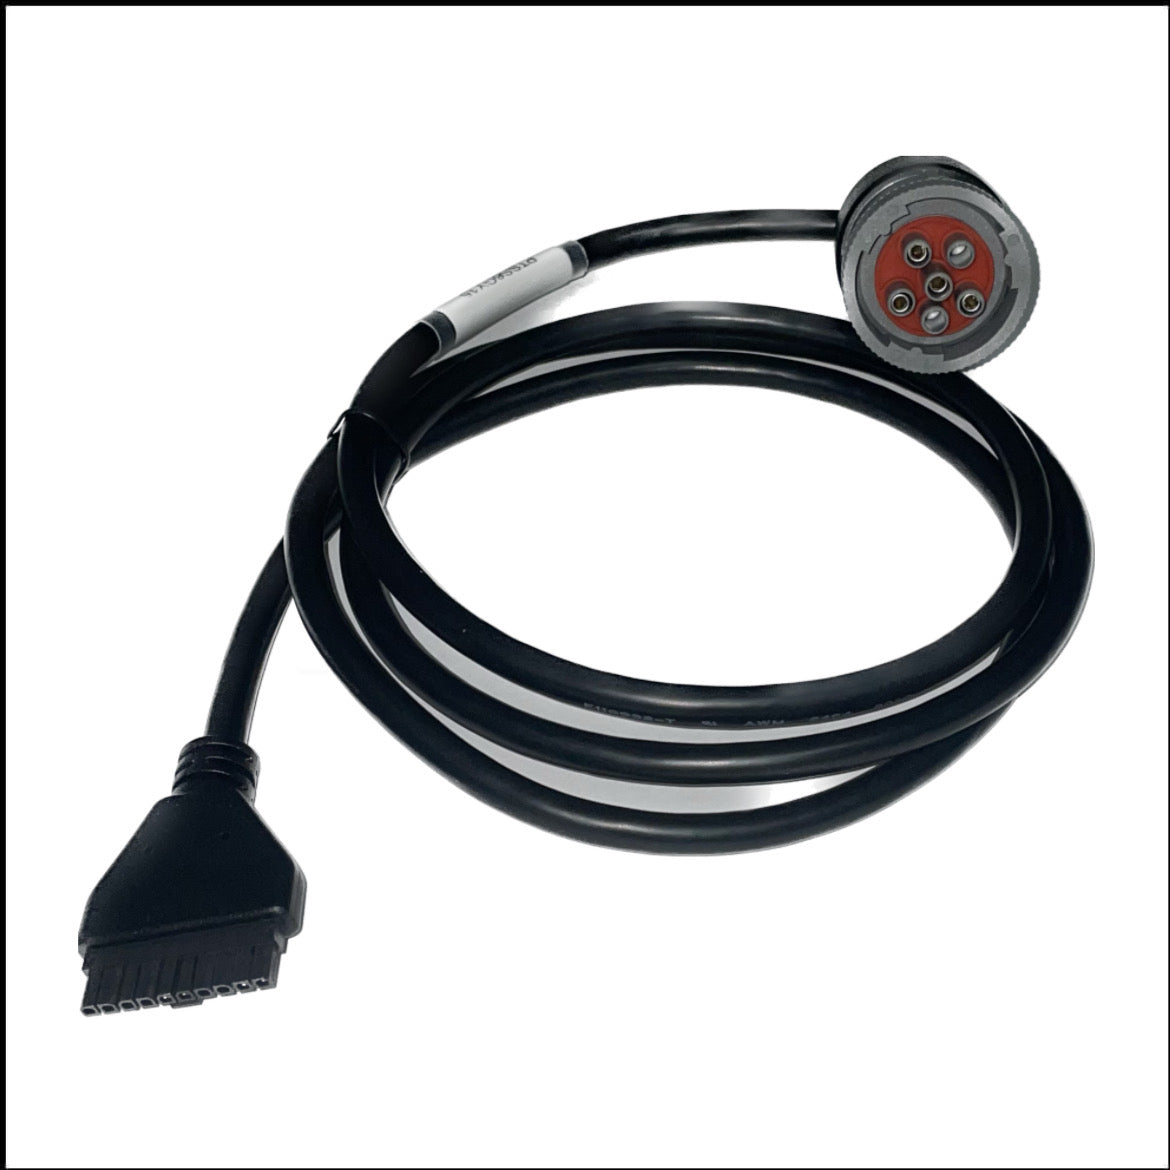 Cable for PT30 HOS ELD Logbook, Compliant ECM w/DOT-Electronic Logging Device, Round Gray 6 Pin Connector, J1708 Part # PTSS6GY15